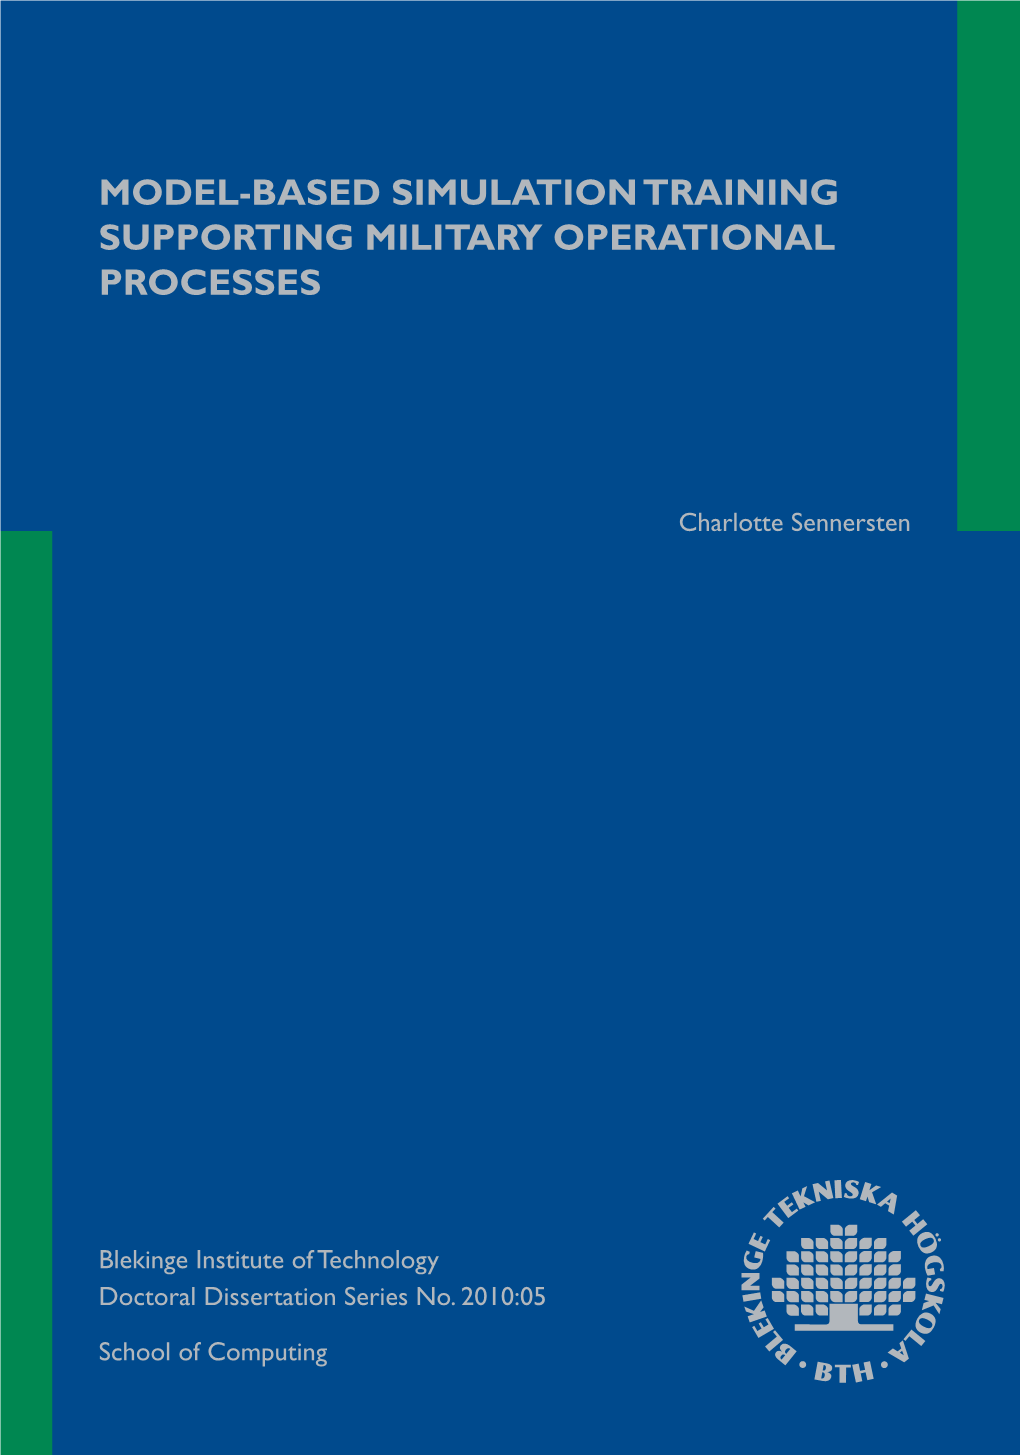 Simulation-Based Training for Military Operational Processes